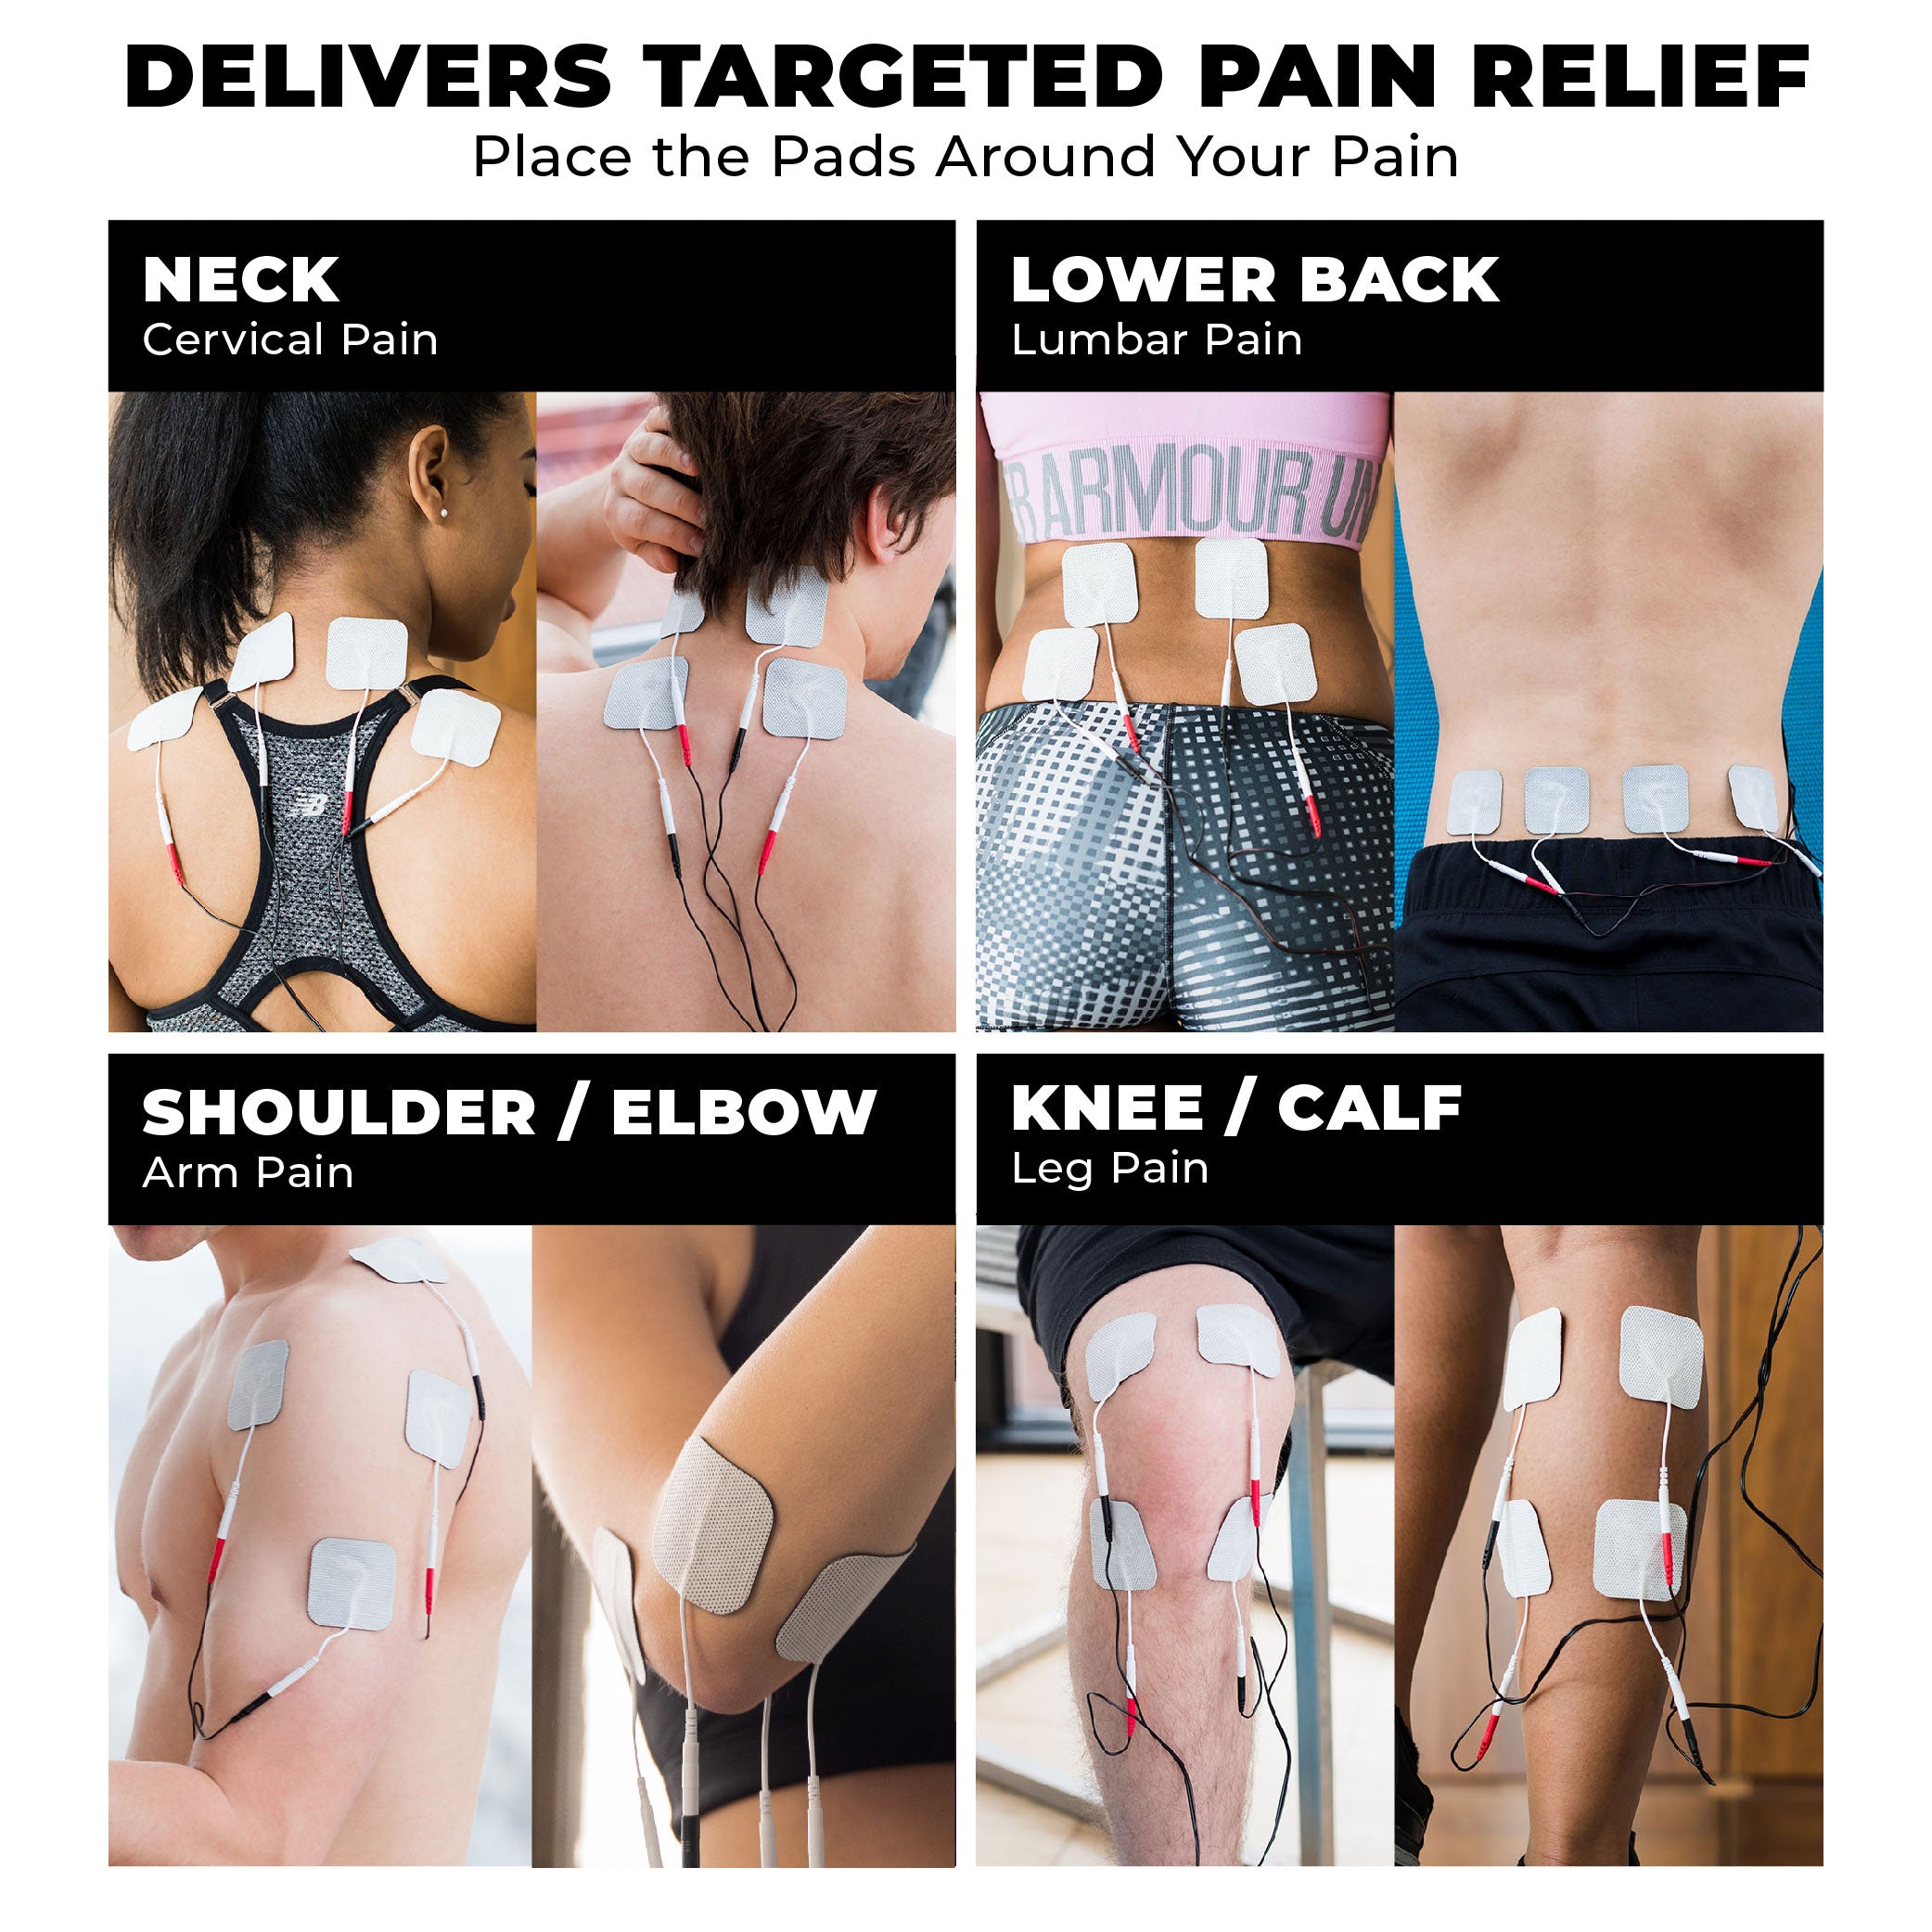 TENS 7000 Rechargeable TENS Unit Muscle Stimulator and Pain Relief Device -  Advanced TENS Machine for Effective Back Pain Relief, Nerve Pain Relief